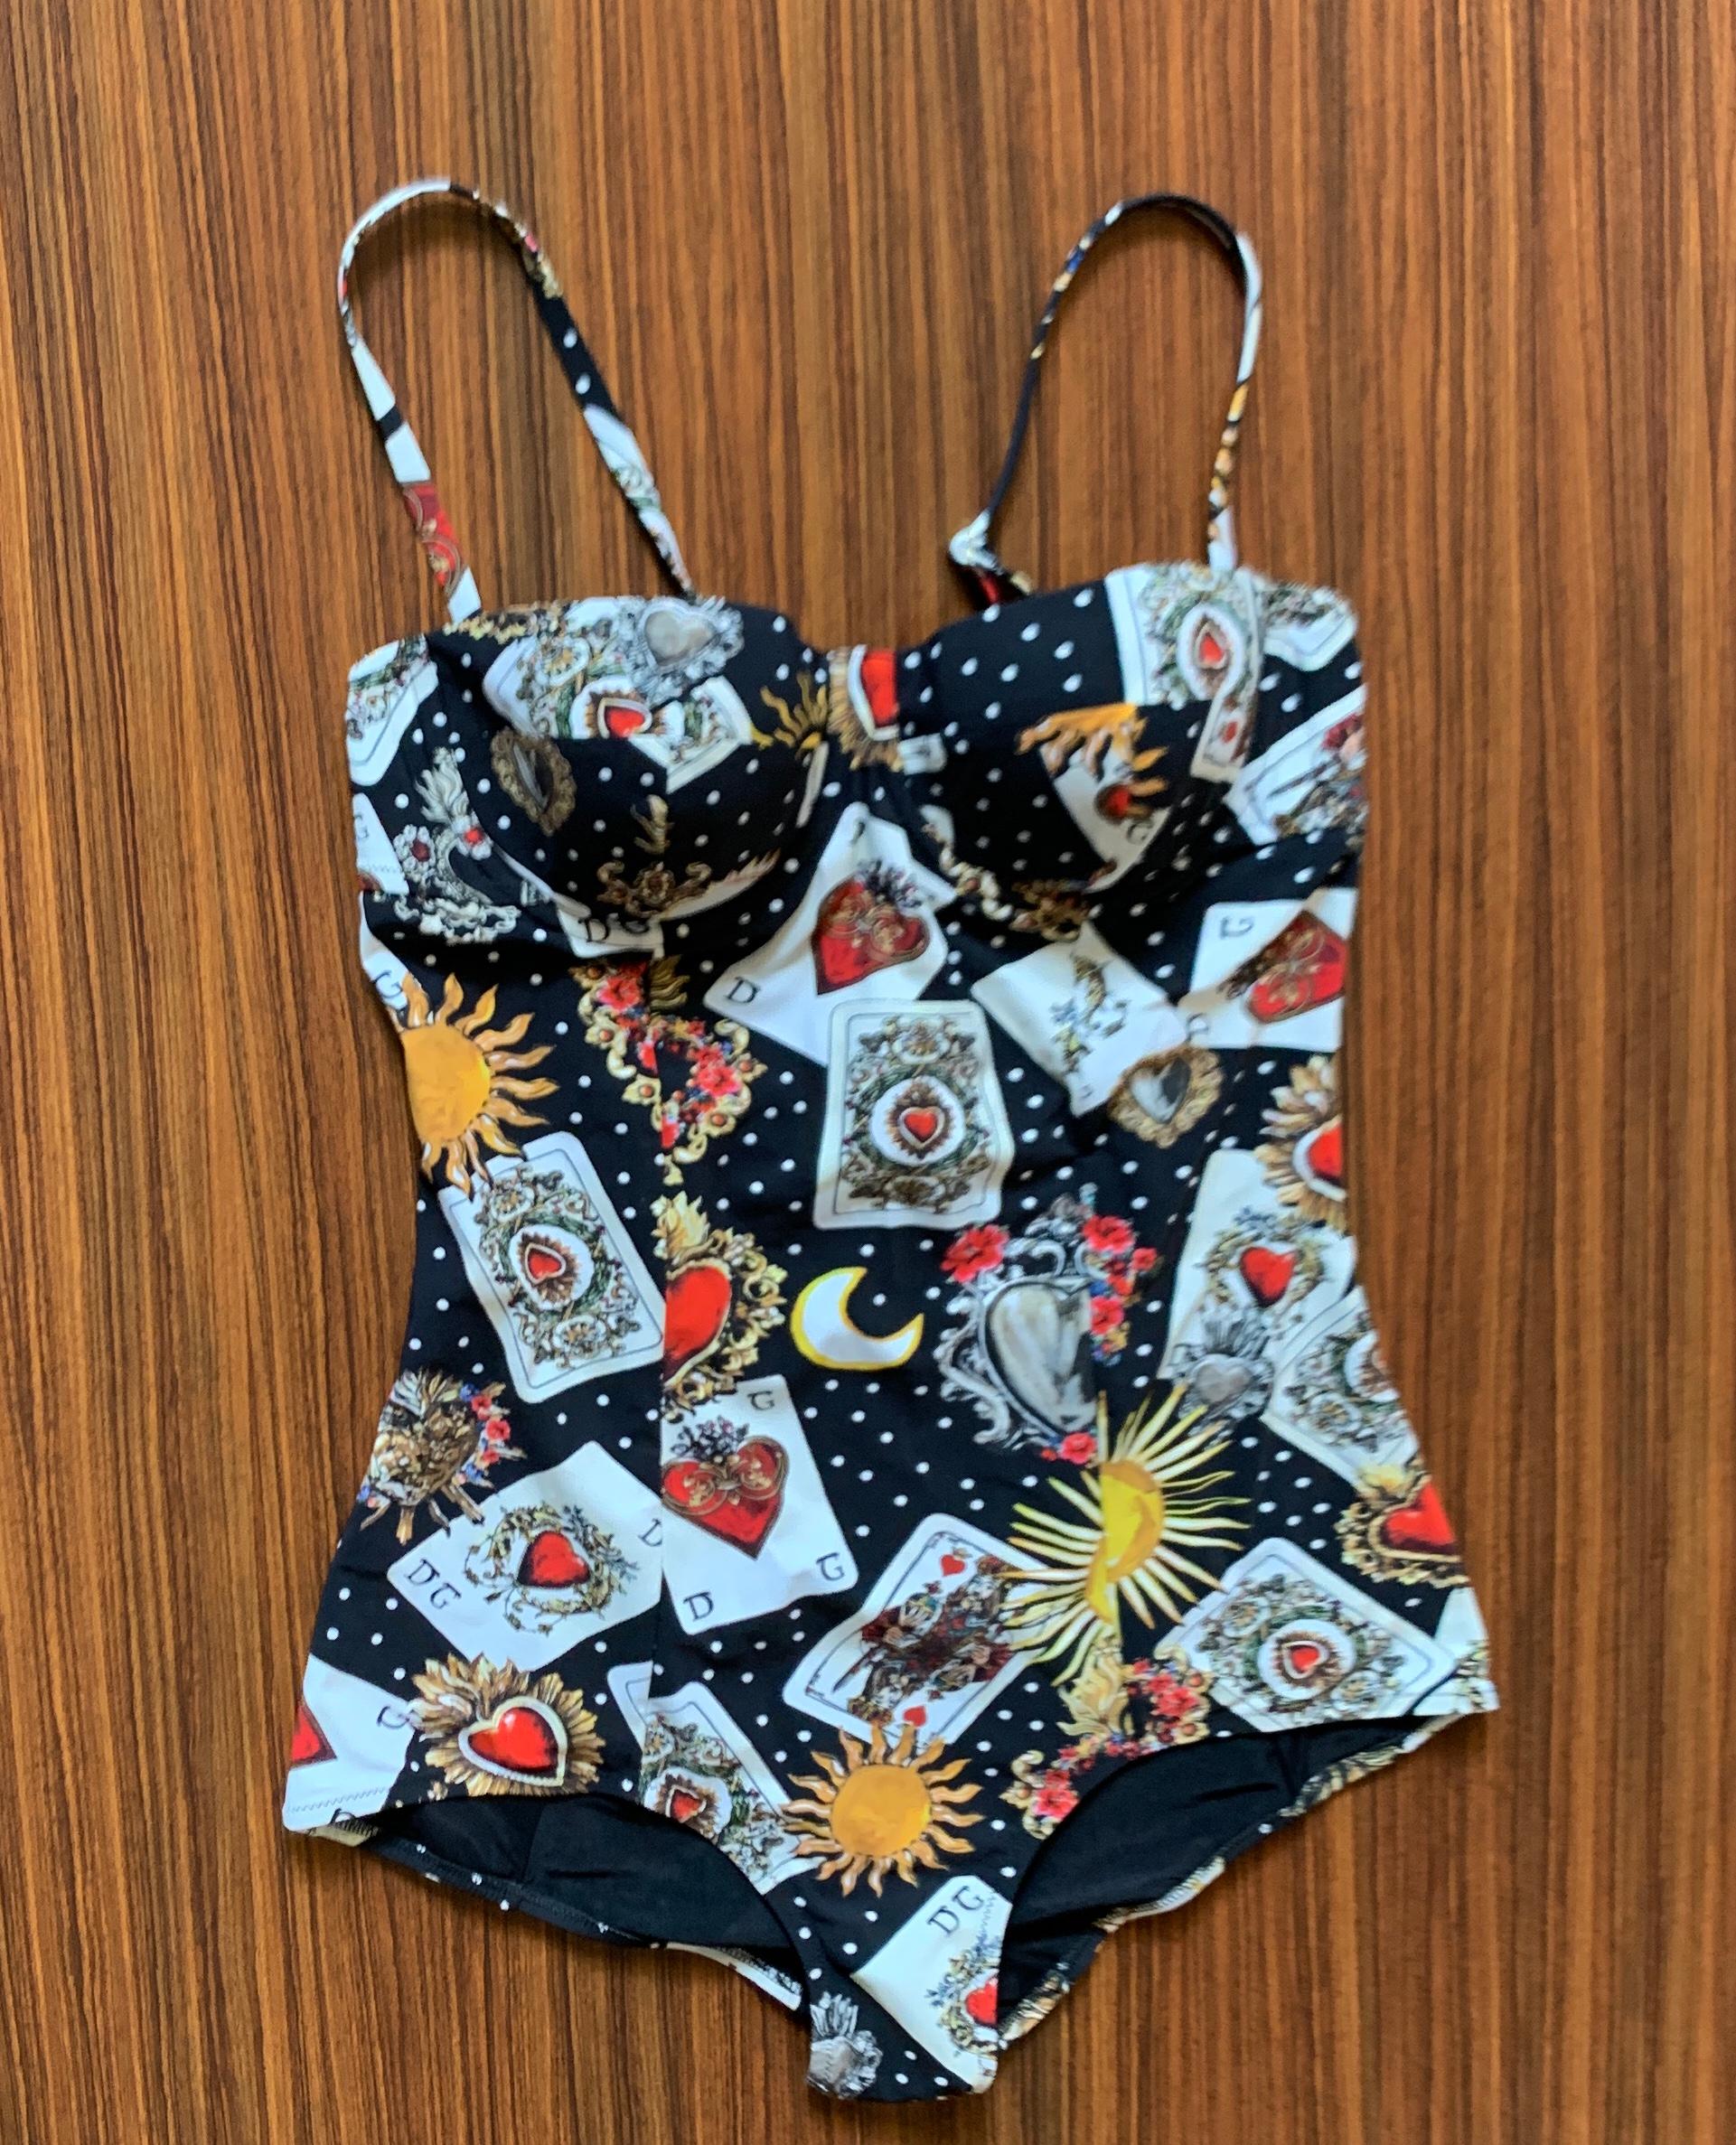 Dolce & Gabbana one-piece swimming suit in black playing card print. Design features distressed DG print cards, sacred hearts, suns, moons, and polkadots throughout. Balconette top has padded cup and underwire. Removable straps, can be worn with